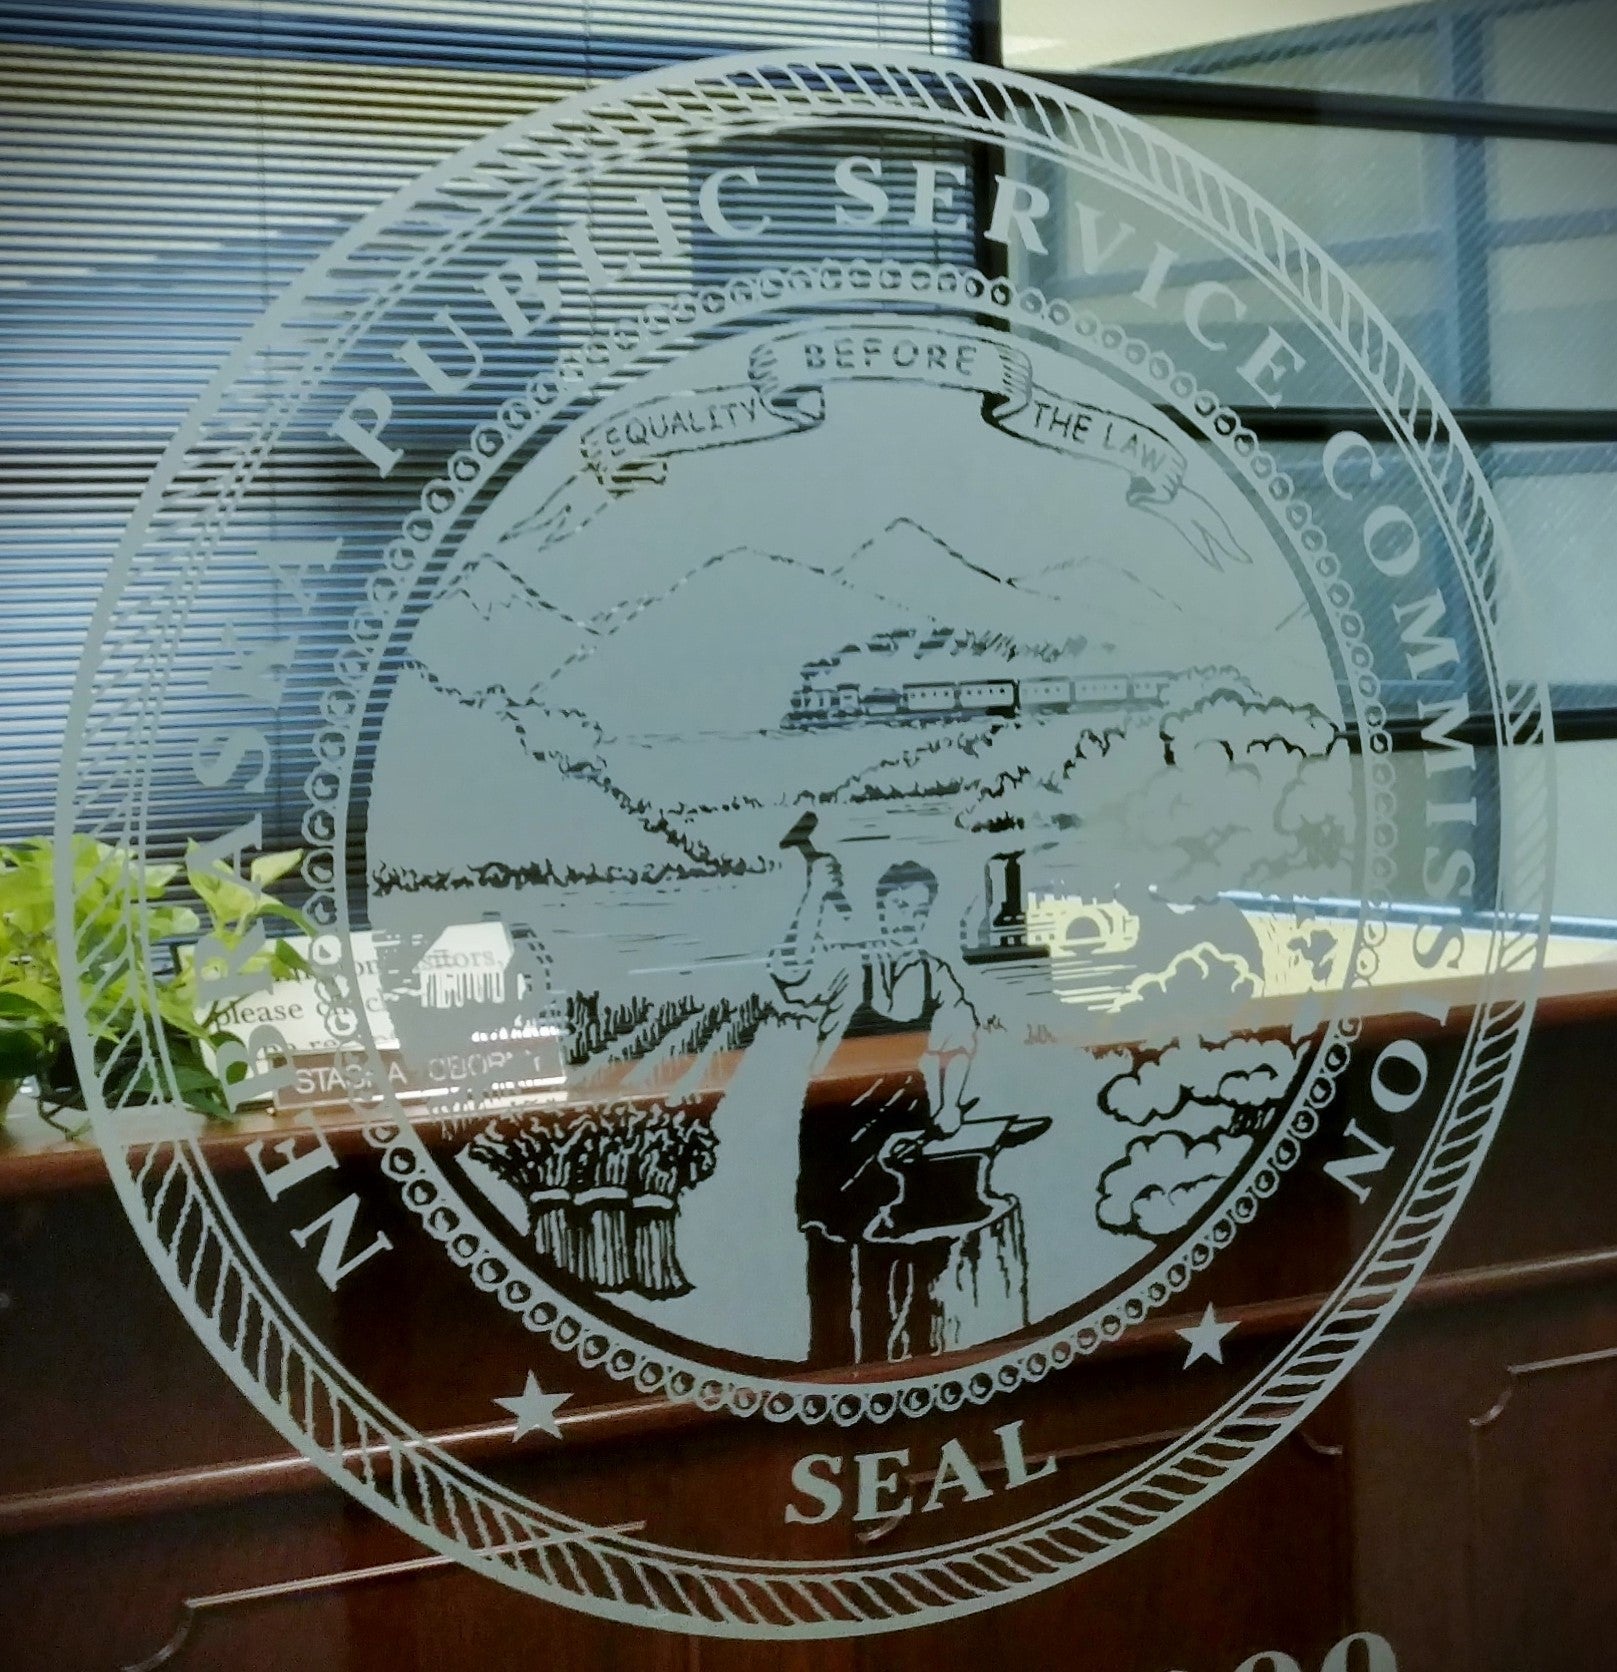 PSC Seal